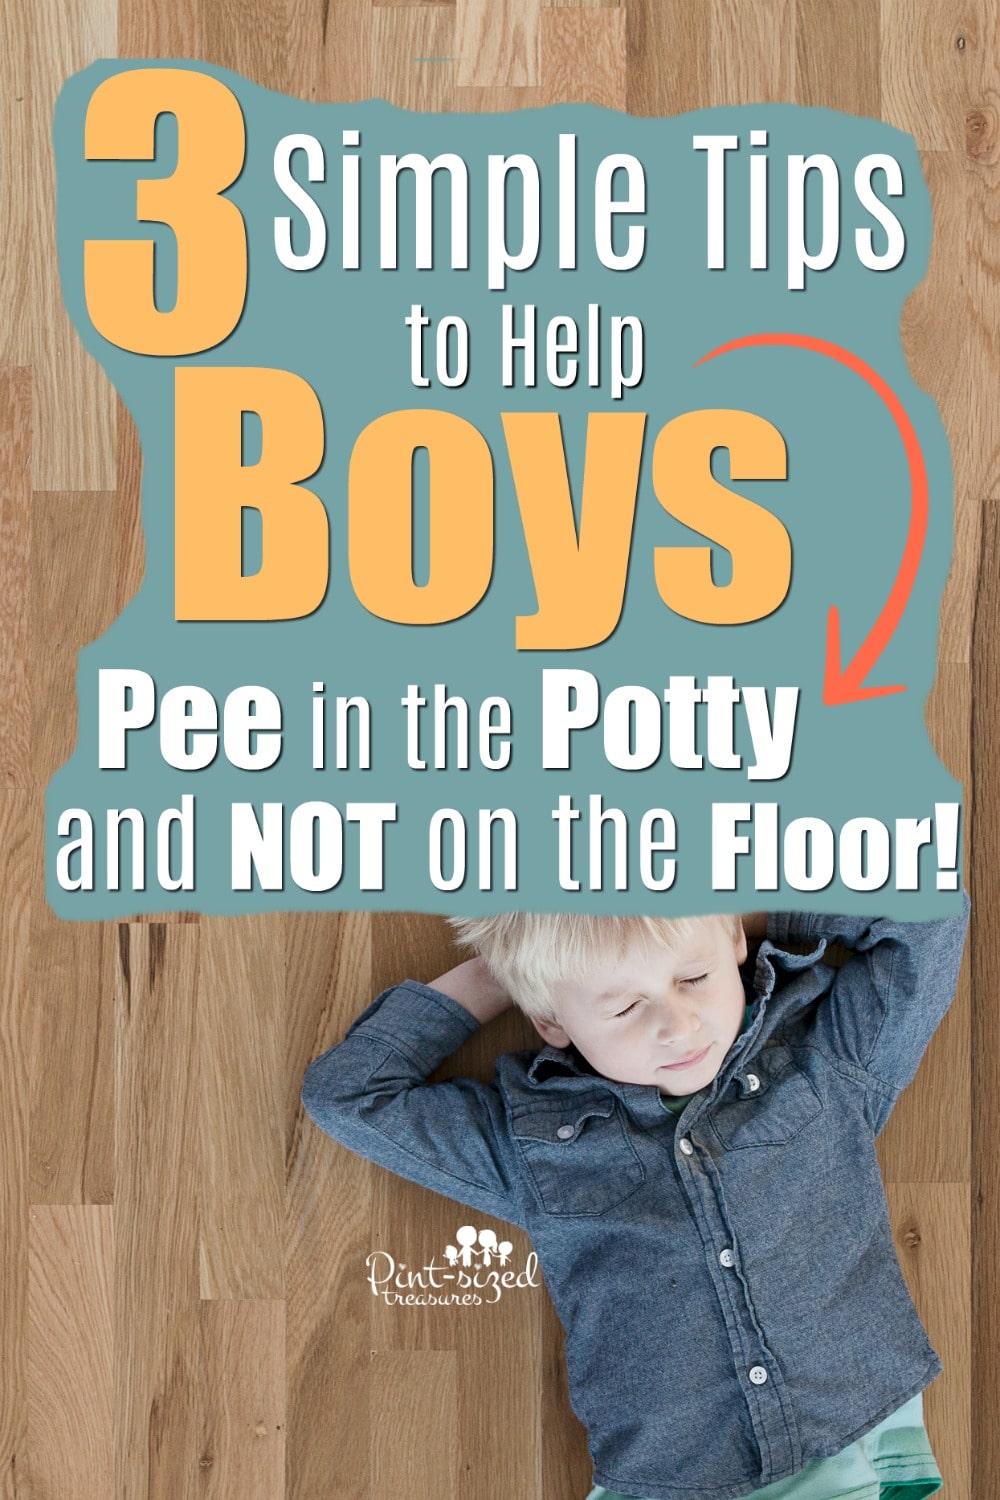 These three simple tips to help boys pee IN the potty and not on the floor are about to make your life a lot less messy!